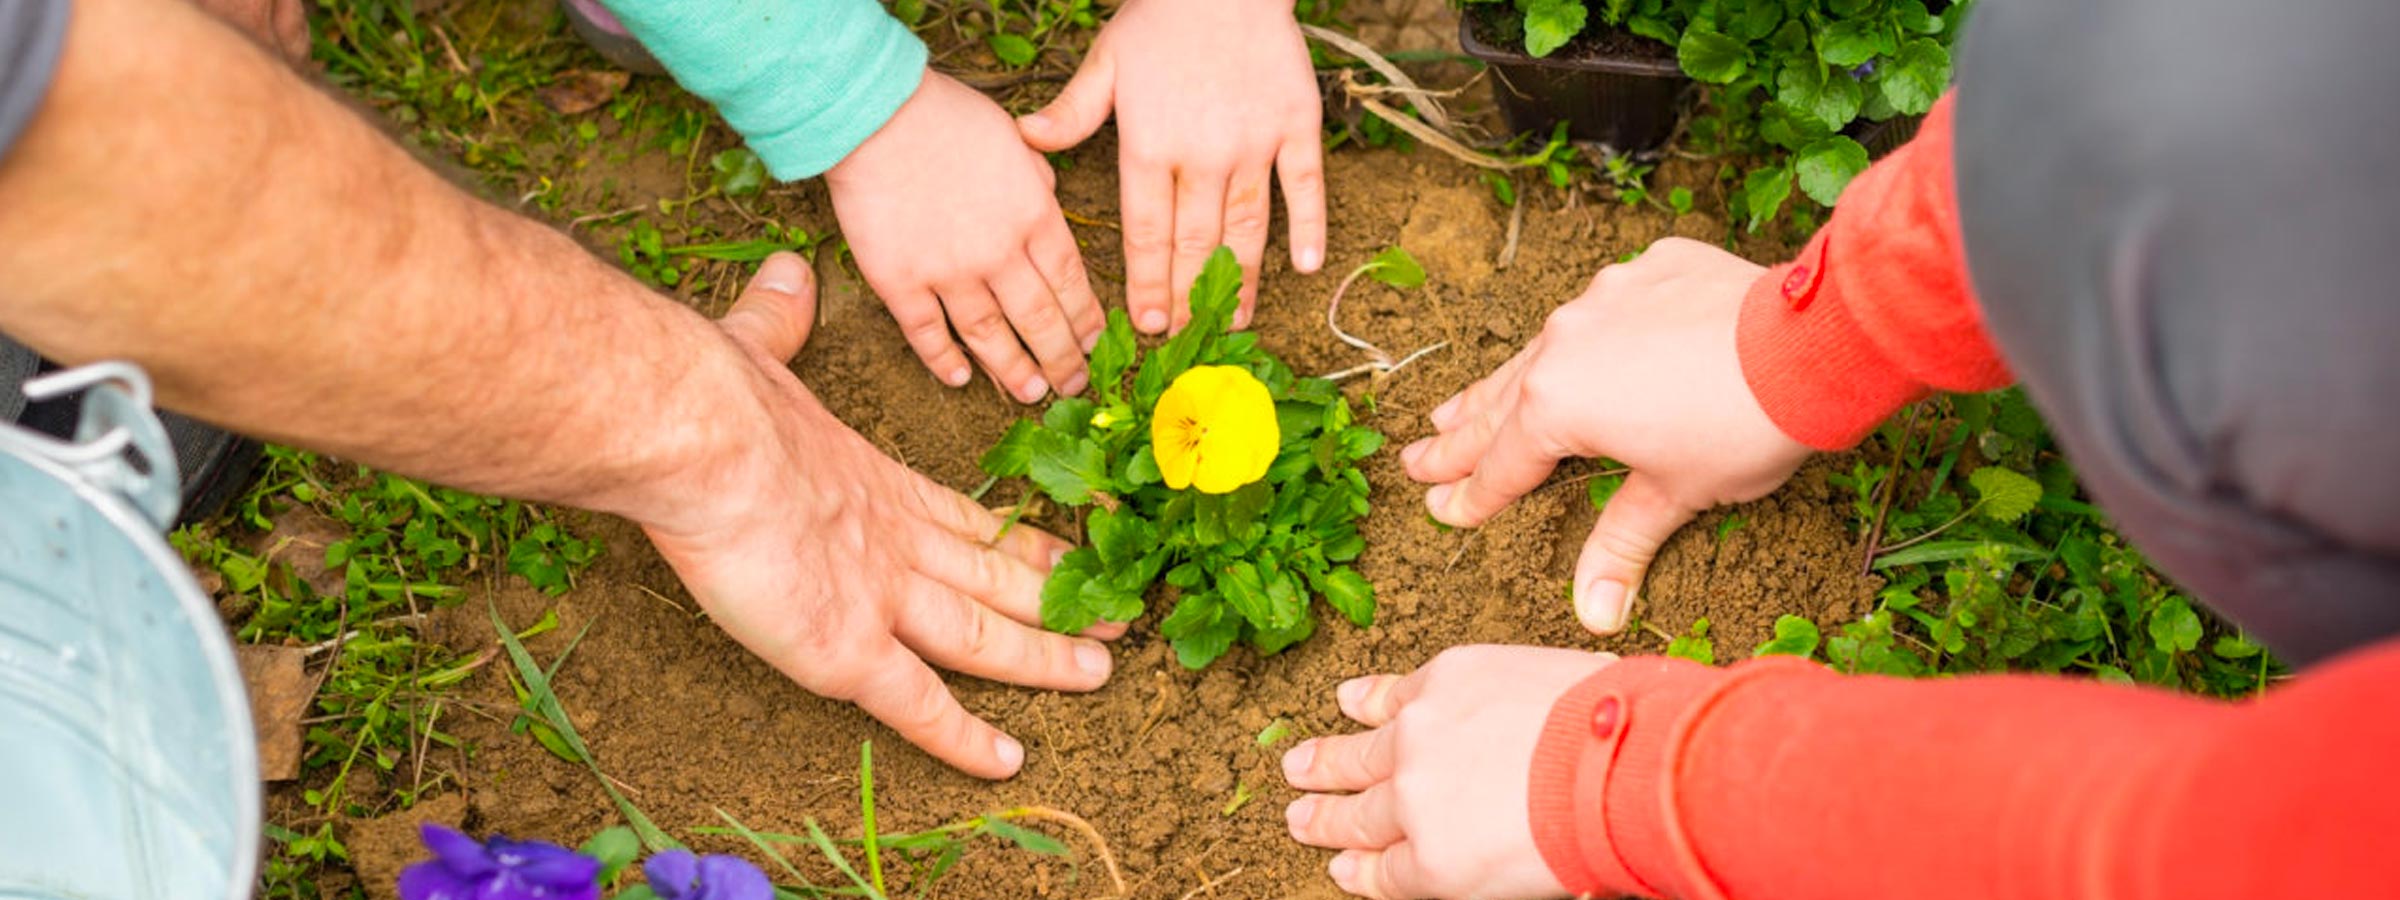 Kids and adults planting a flower